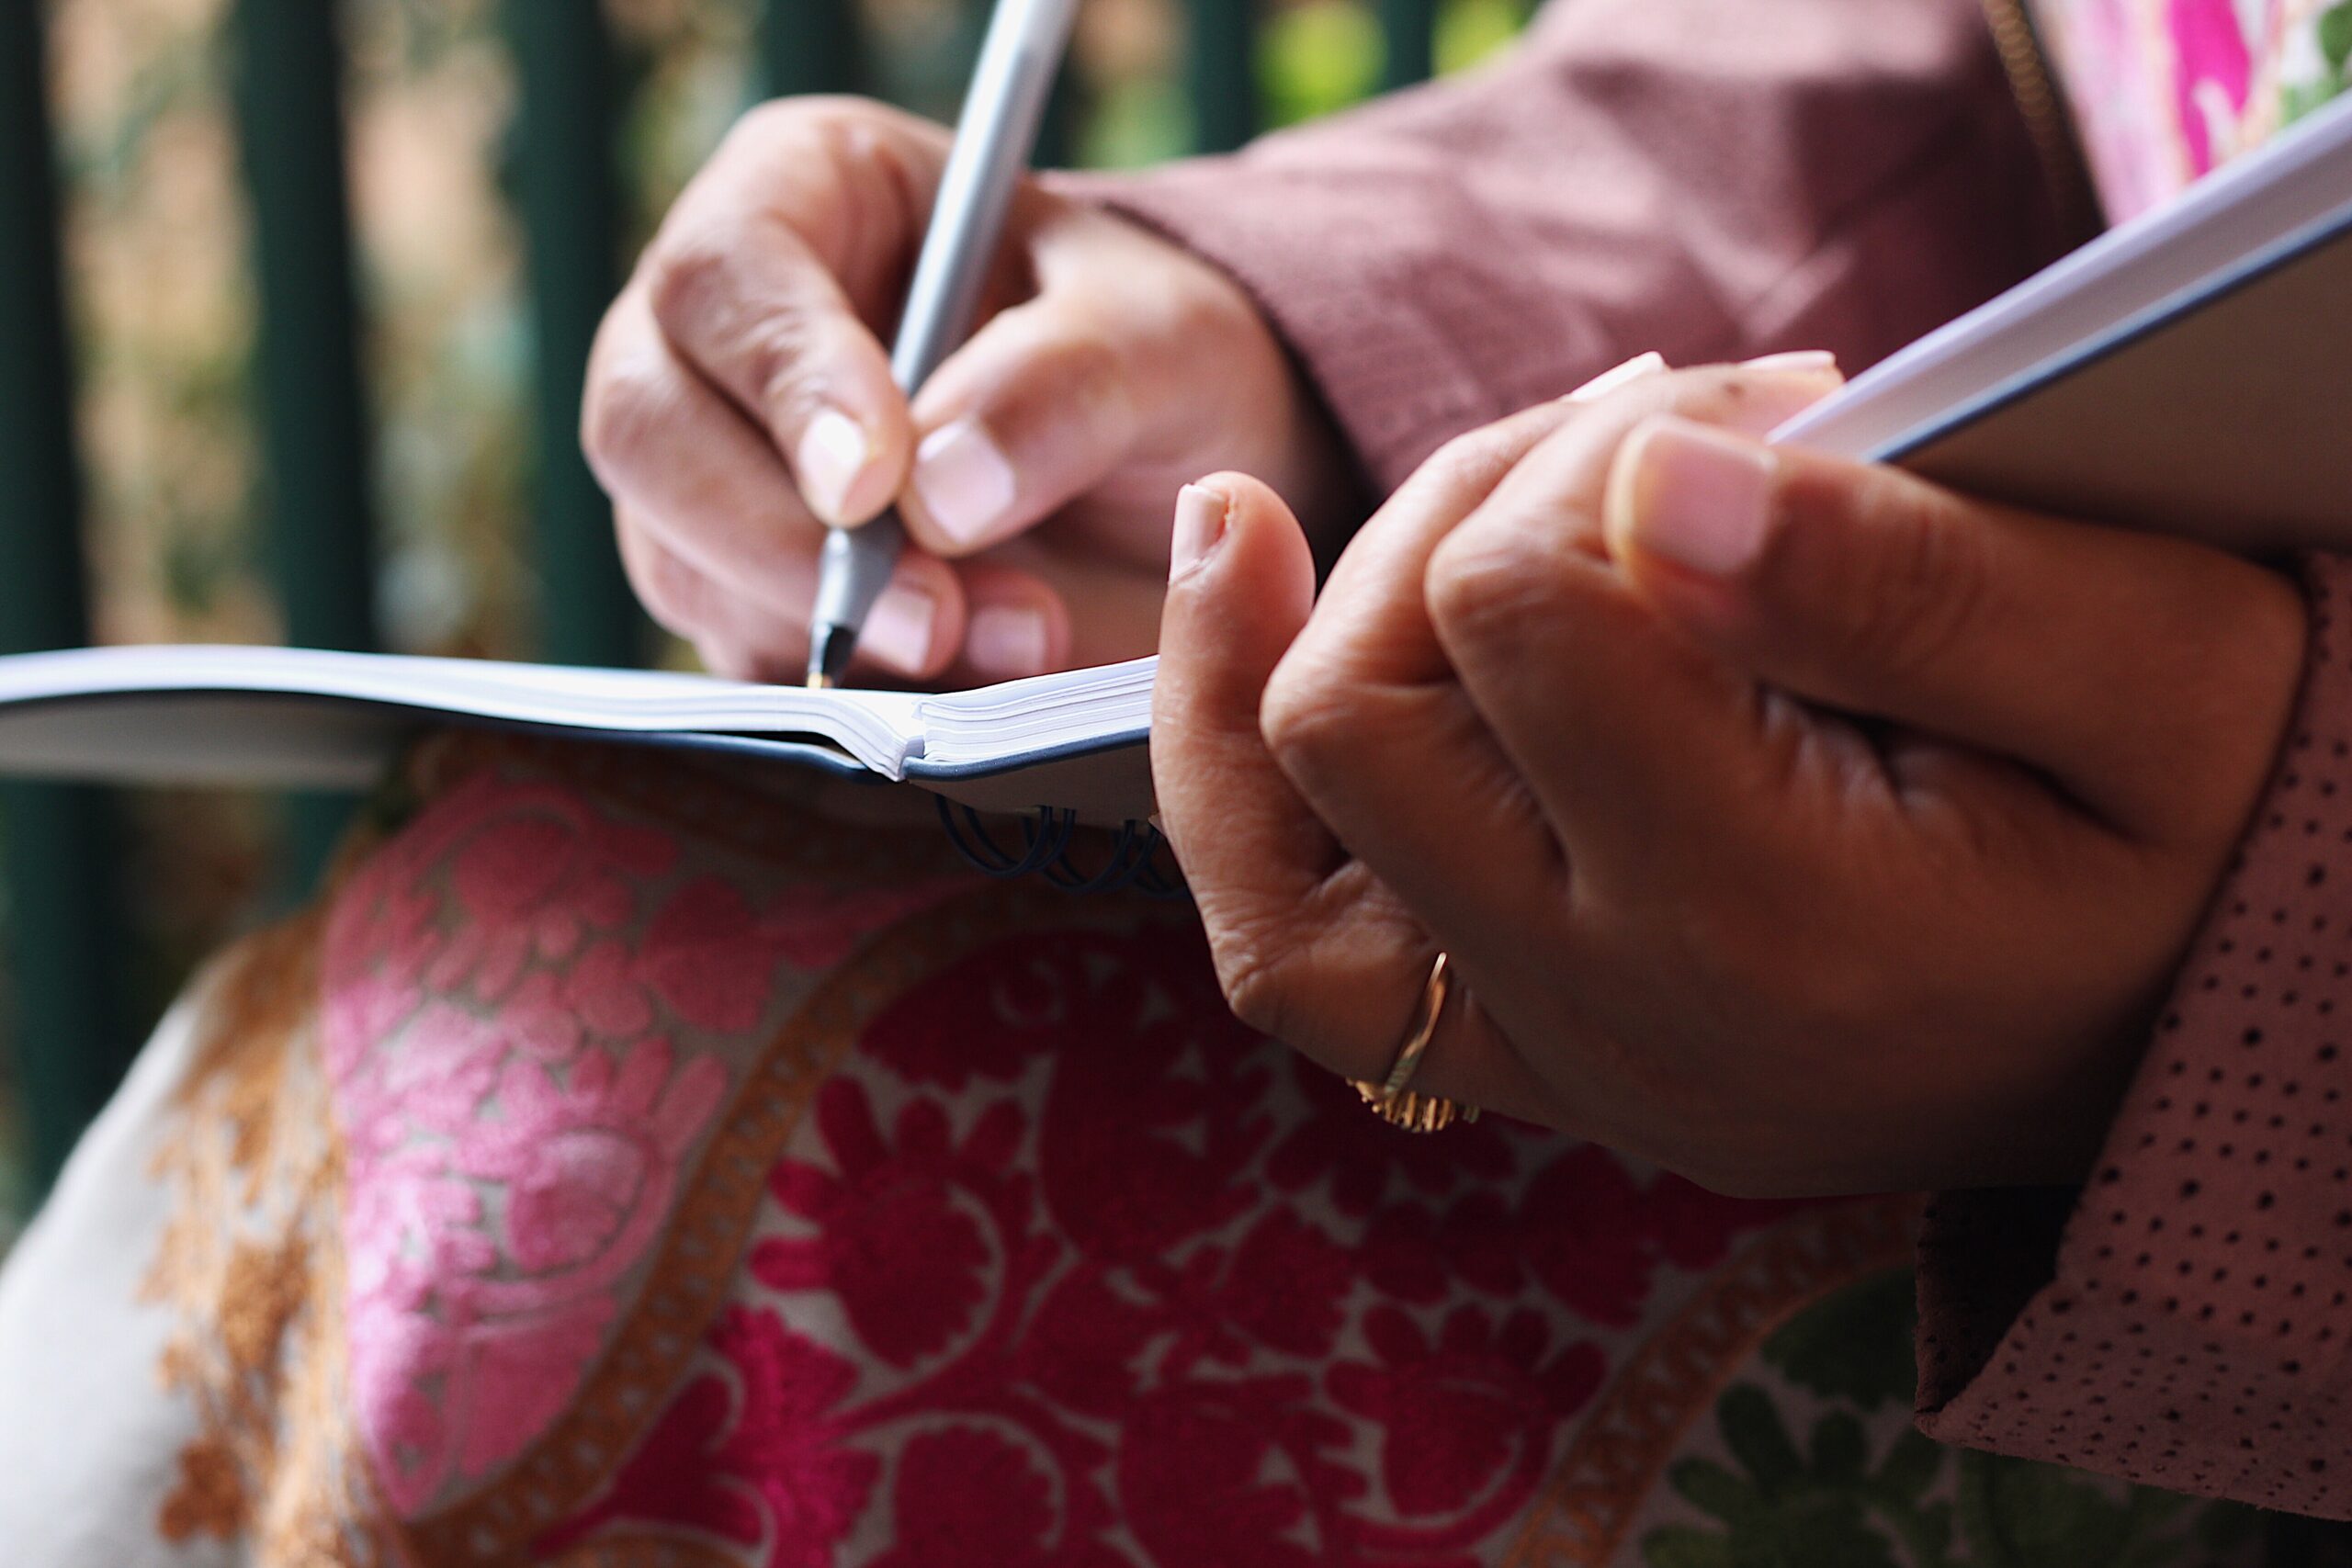 Closeup photo of a woman's hands holding a journal and pen, writing while wearing a pink shirt and patterned skirt.